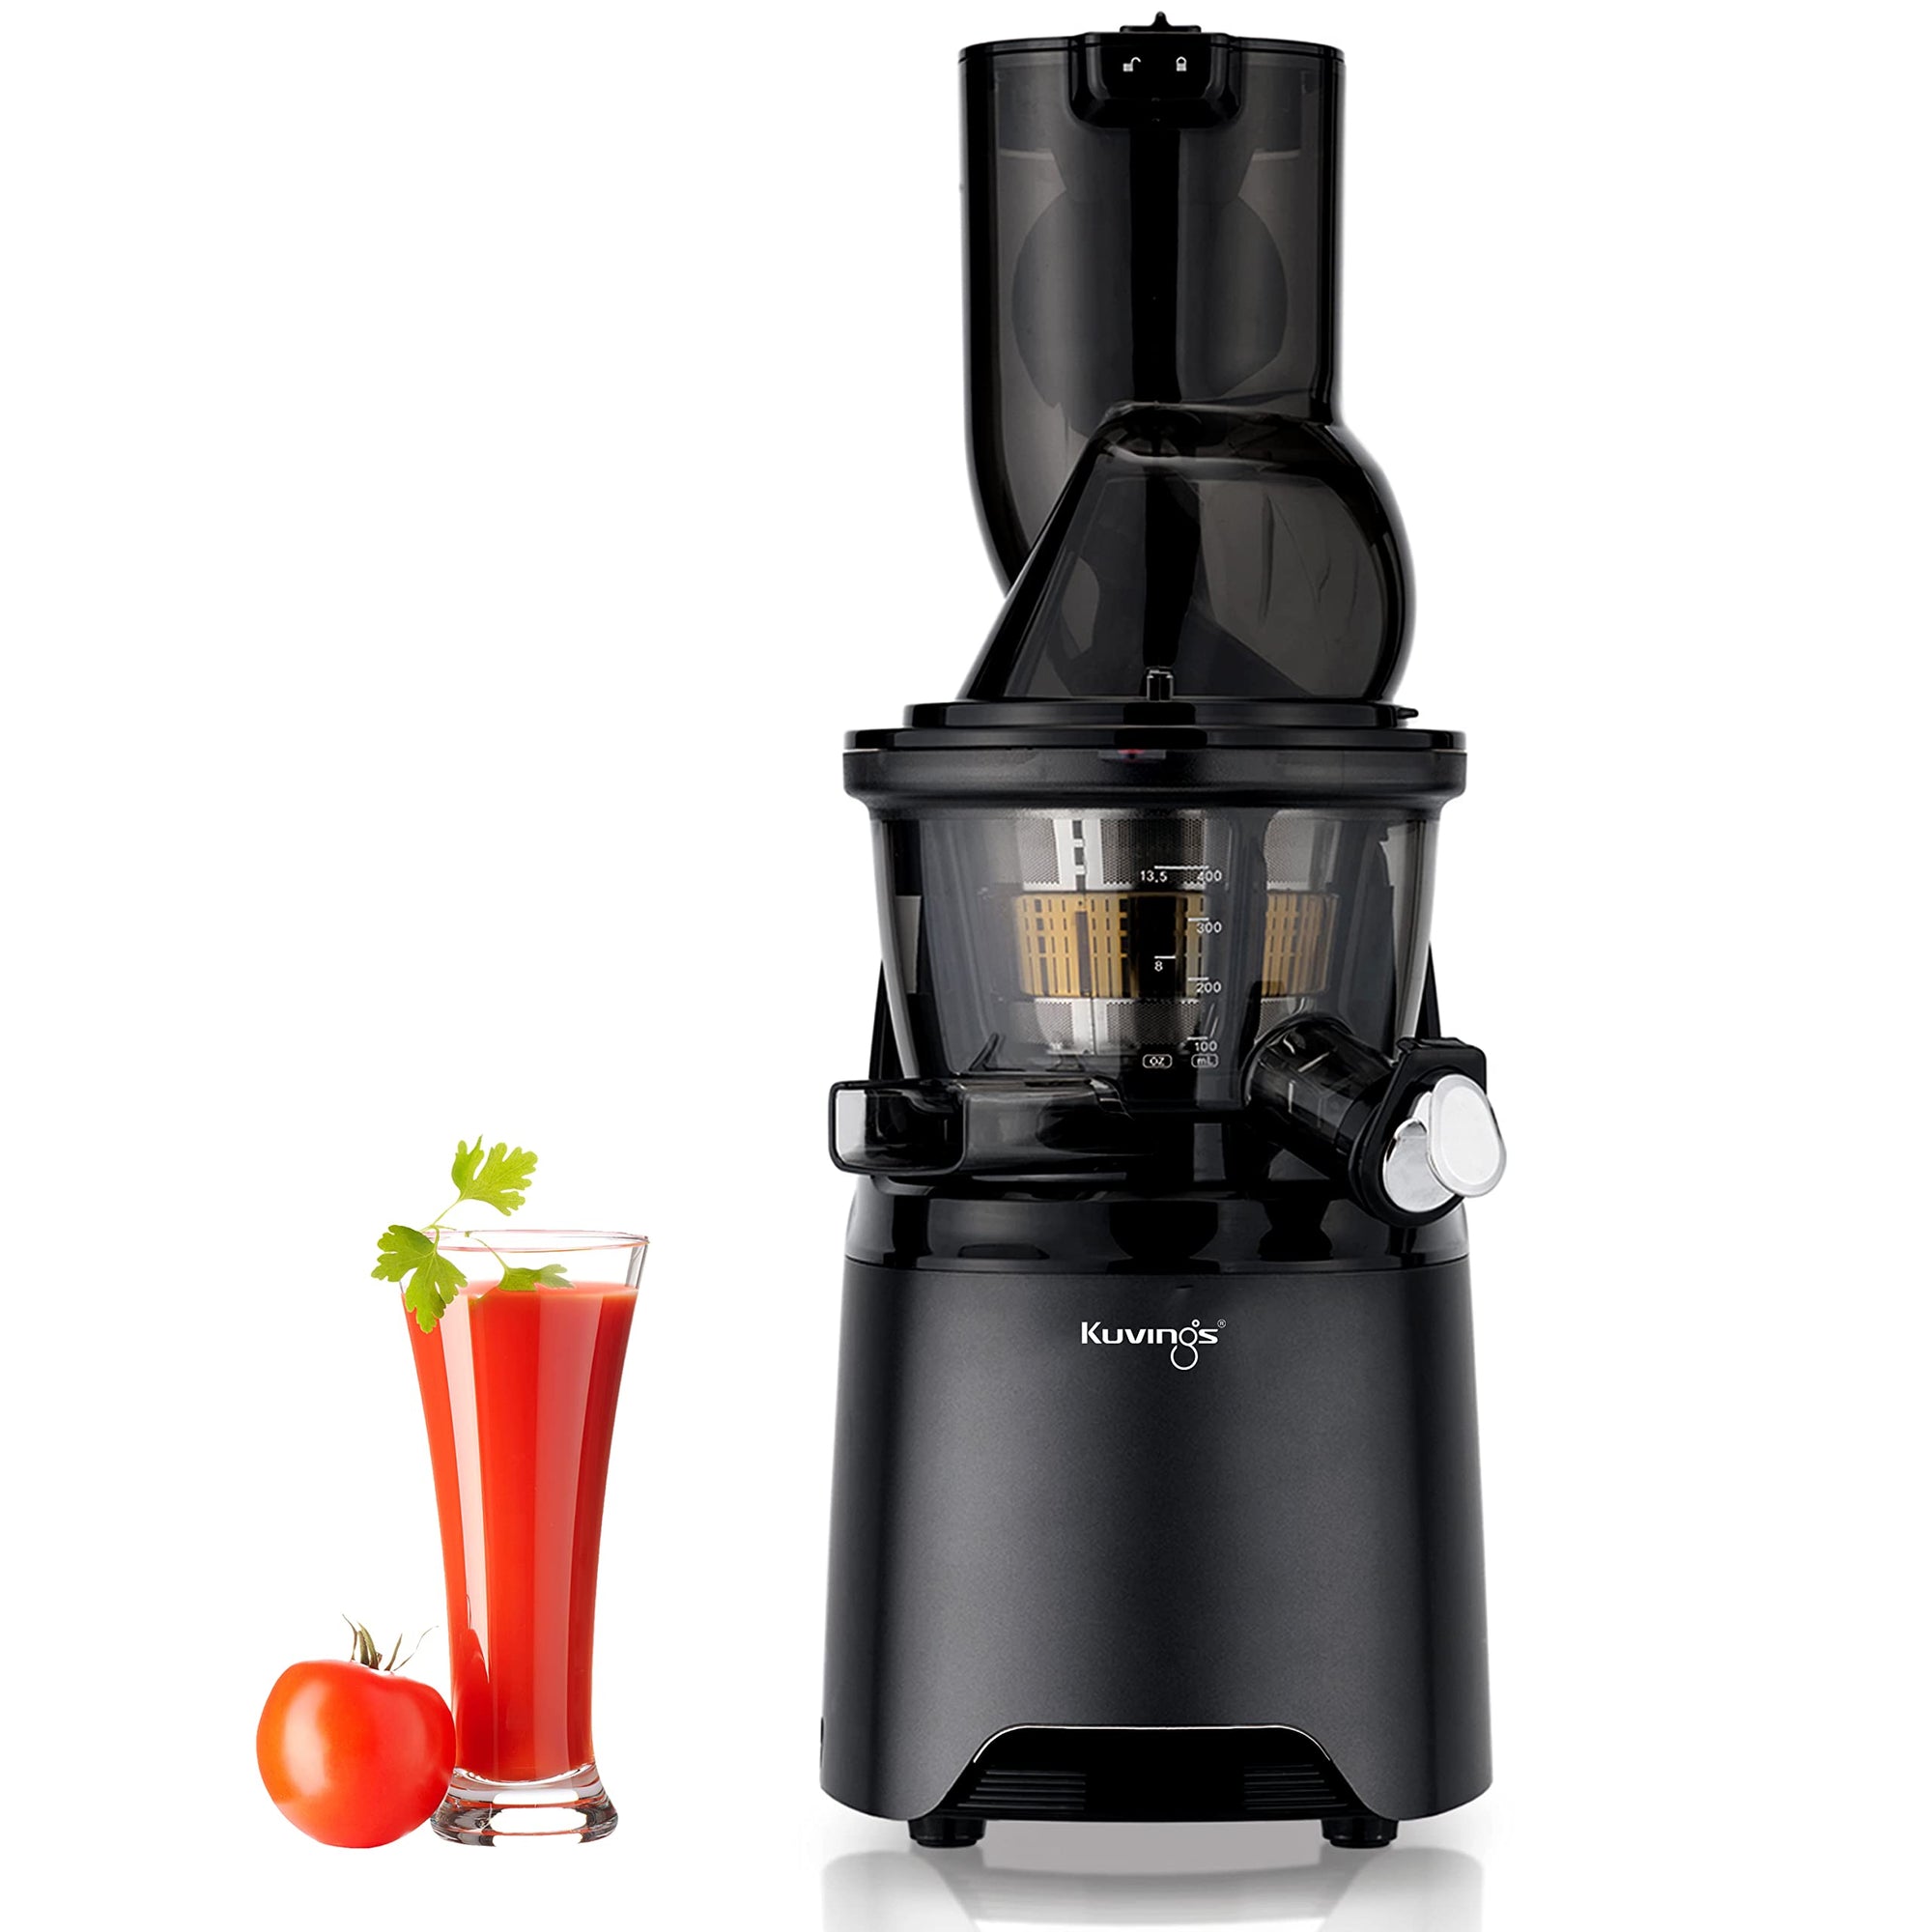 Kuvings EVO810 Black Professional Cold Press Whole Slow Juicer, World's Only Juicer with Patented Rubber & Silicon-Free Technology, All-in-1 Fruit & Vegetable Juicer (EVO810 Black)